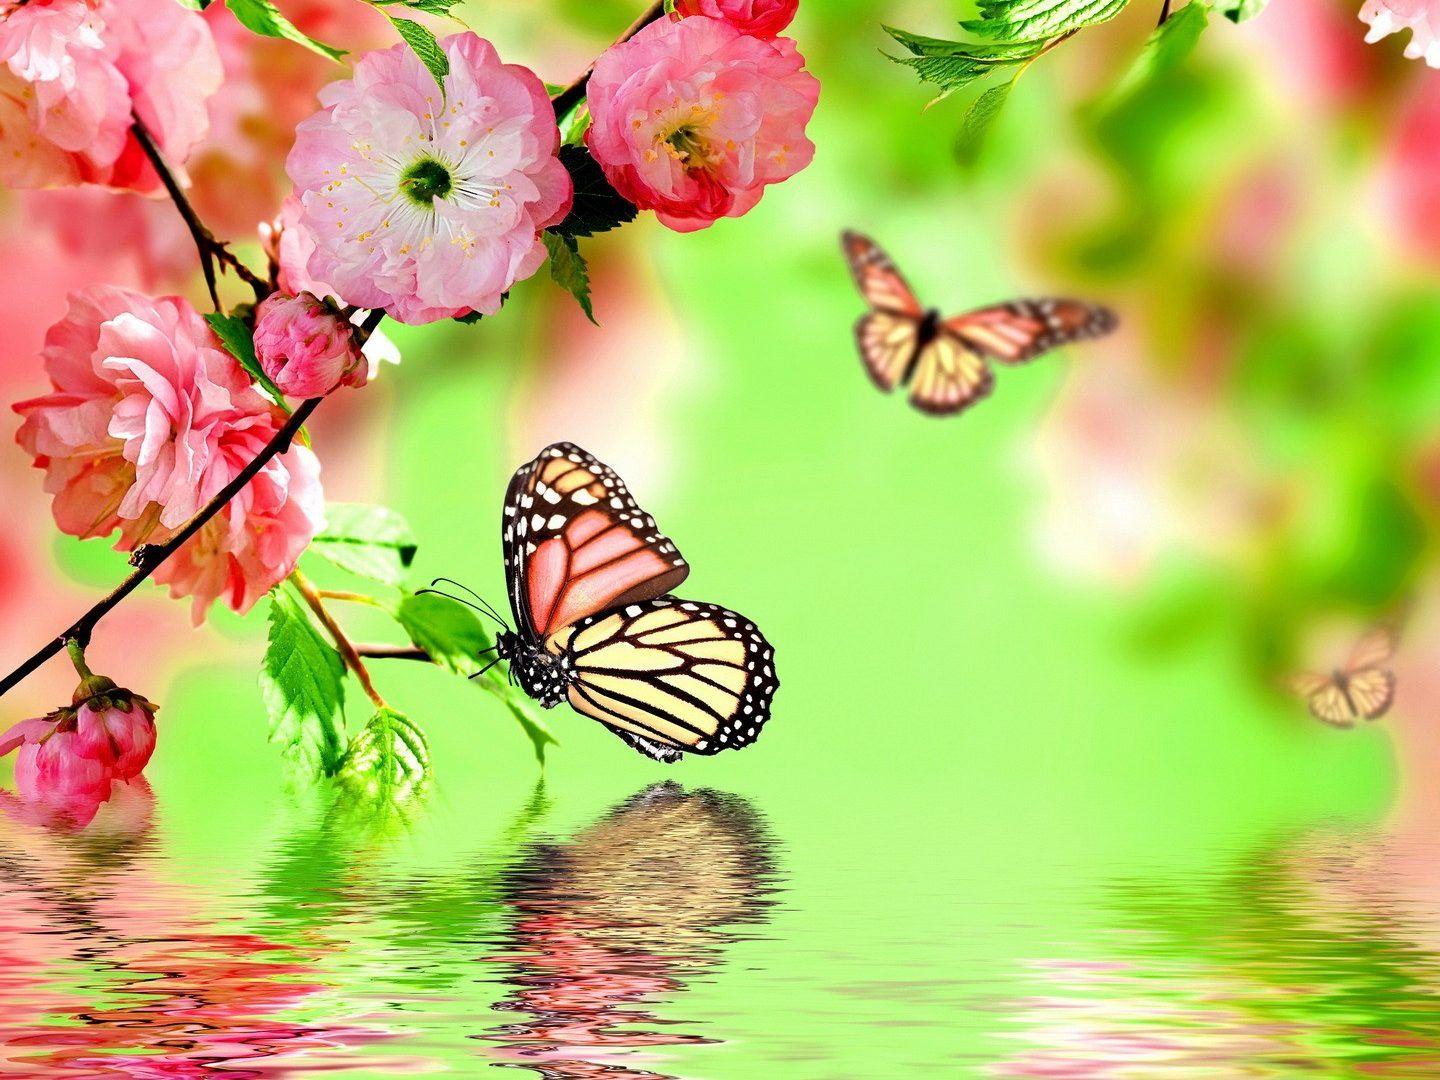 Spring Butterfly Wallpapers - Top Free Spring Butterfly Backgrounds ...